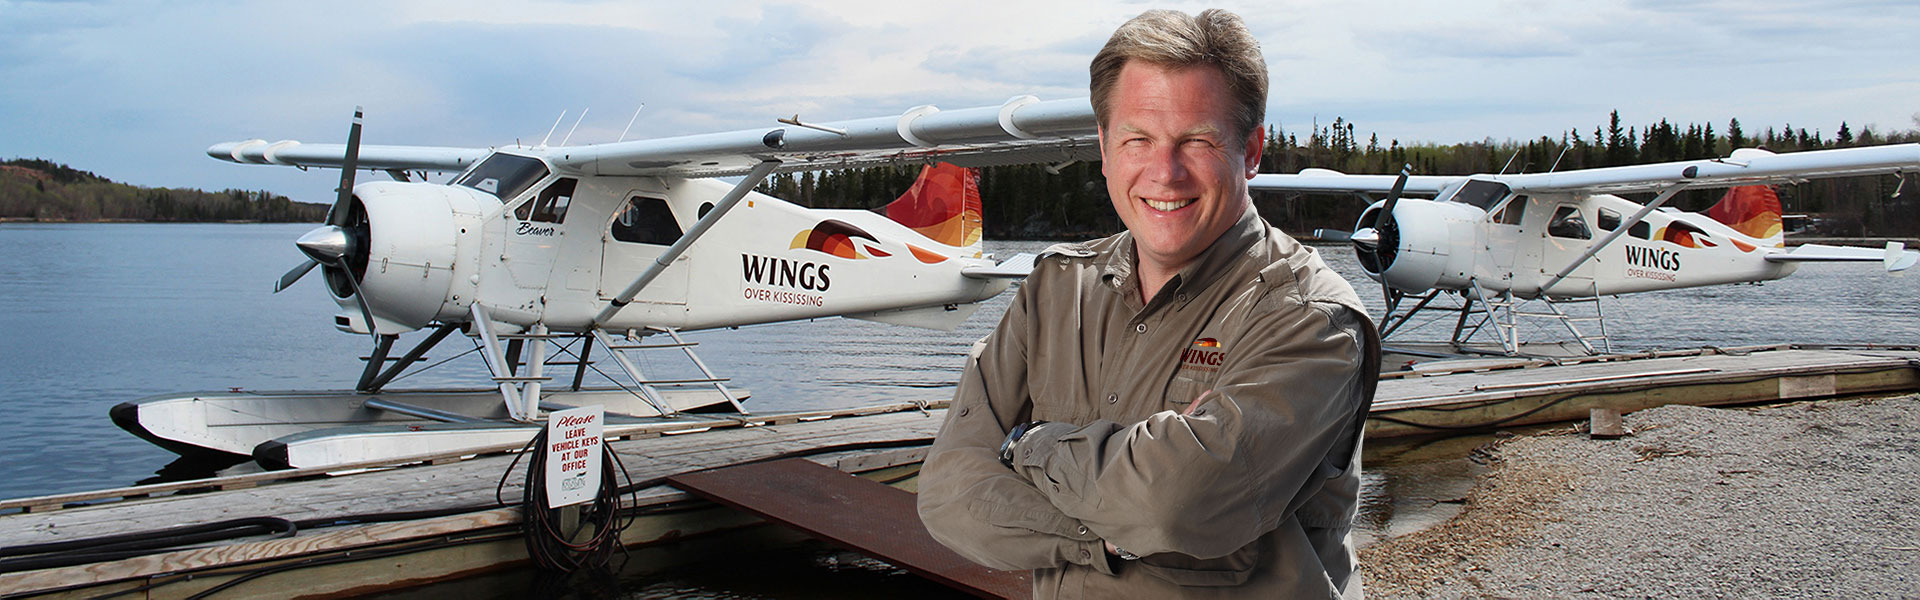 Curt Enns, Owner/Operator in front of docked Piston Beaver aircraft